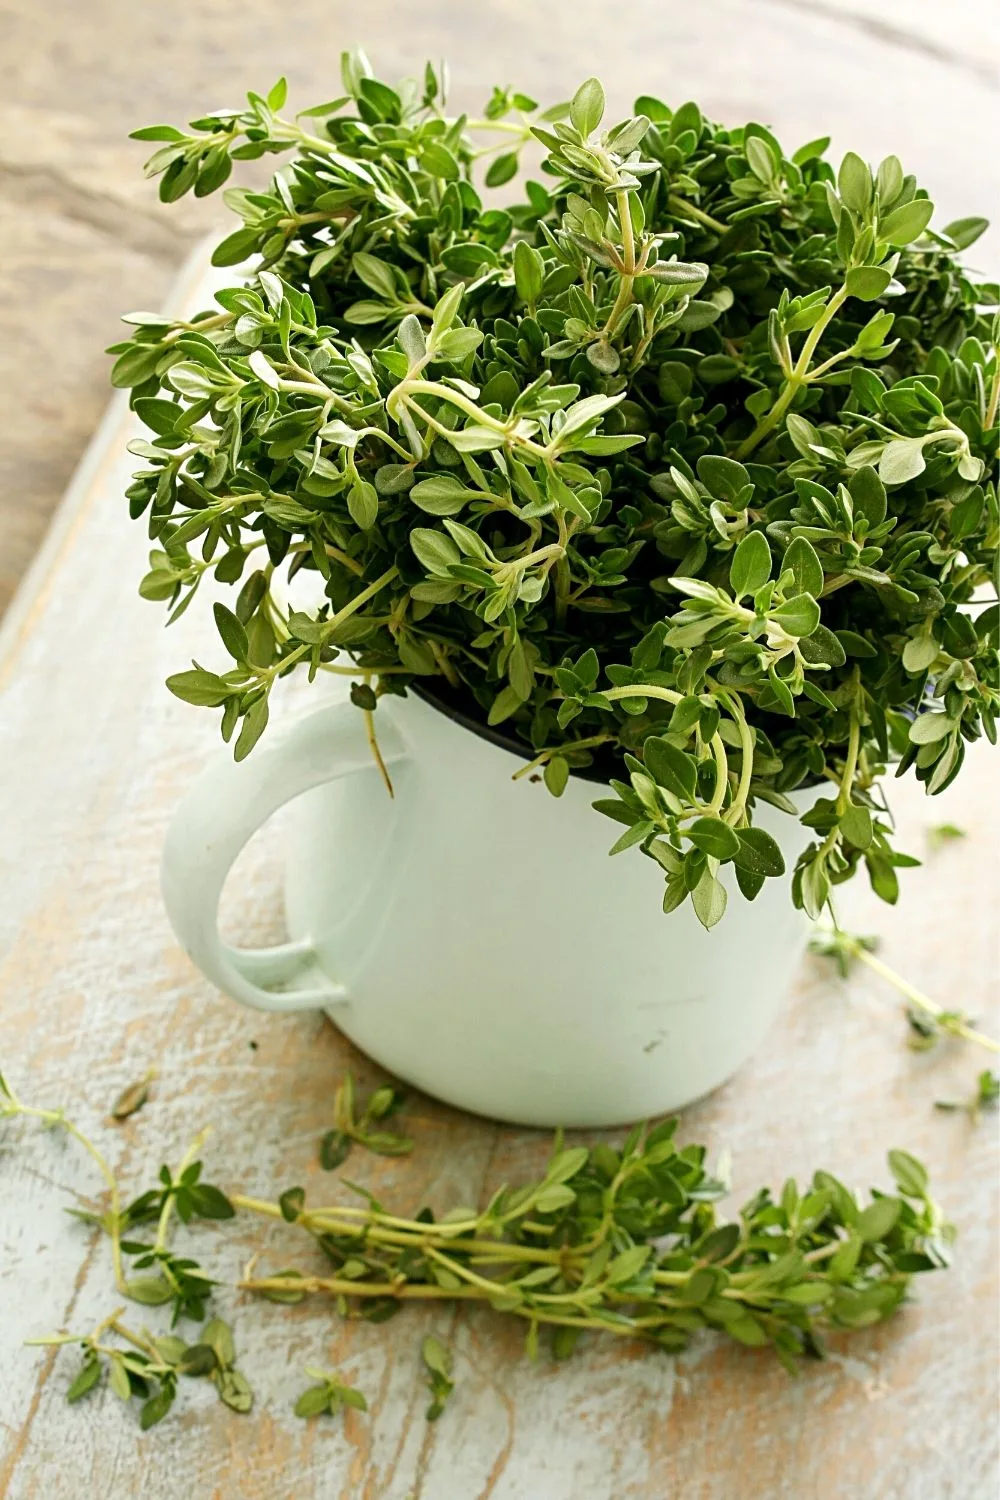 Thyme grows a clover flower that is both sweet and spicy that is a great addition to your southwest facing garden